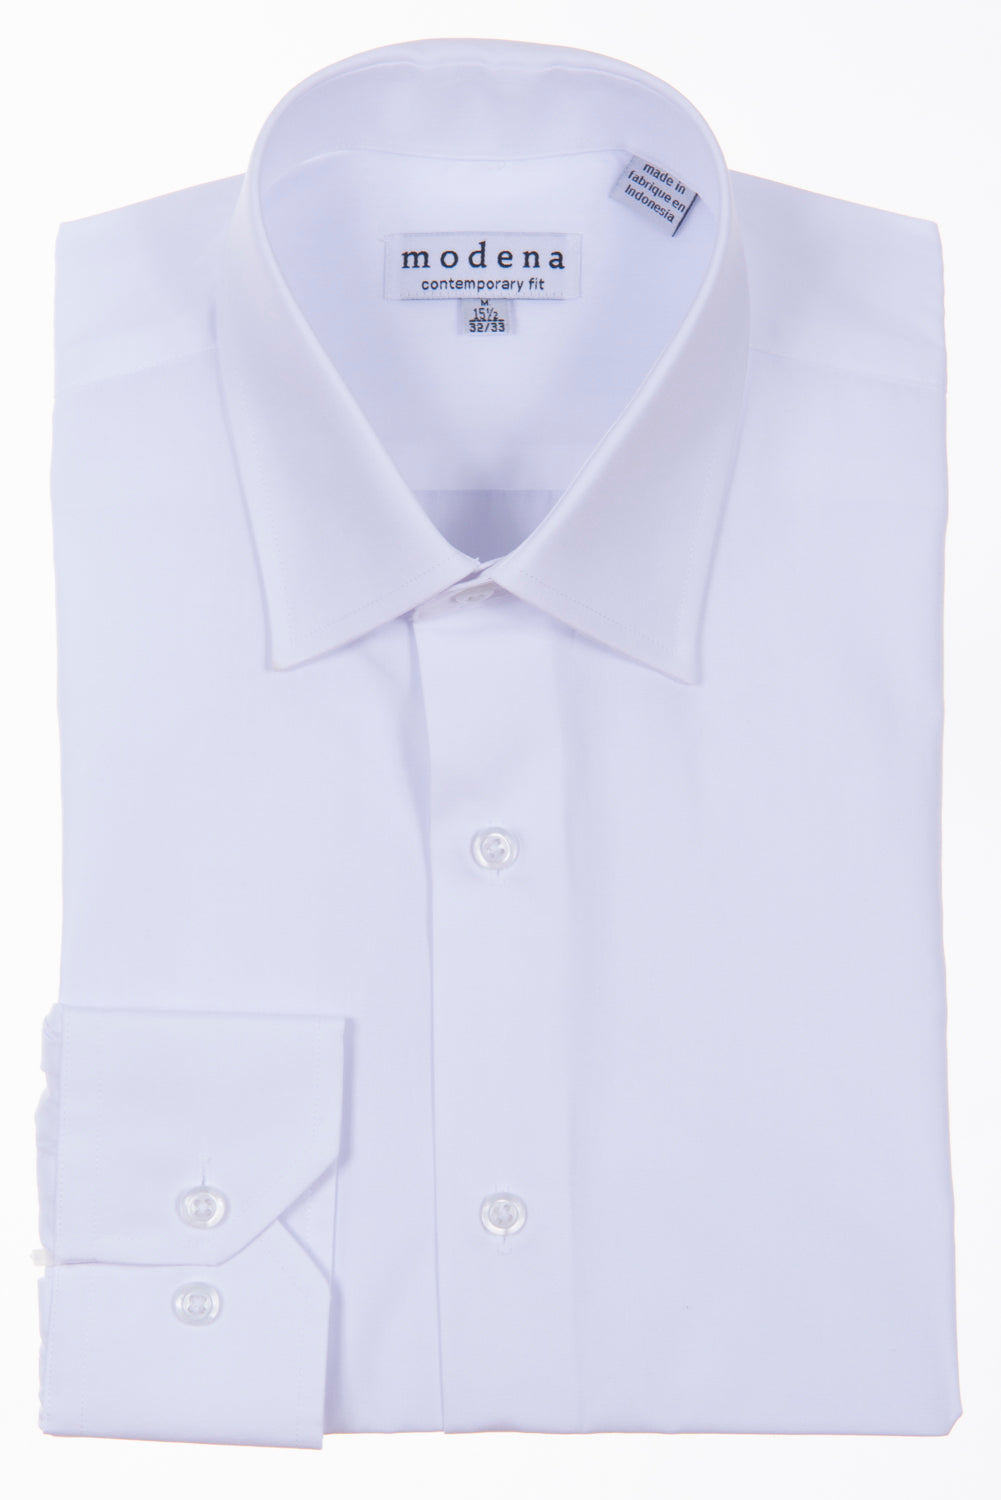 Modena - White - Solid - Cotton Blend - Dress Shirt - Contemporary Fit.